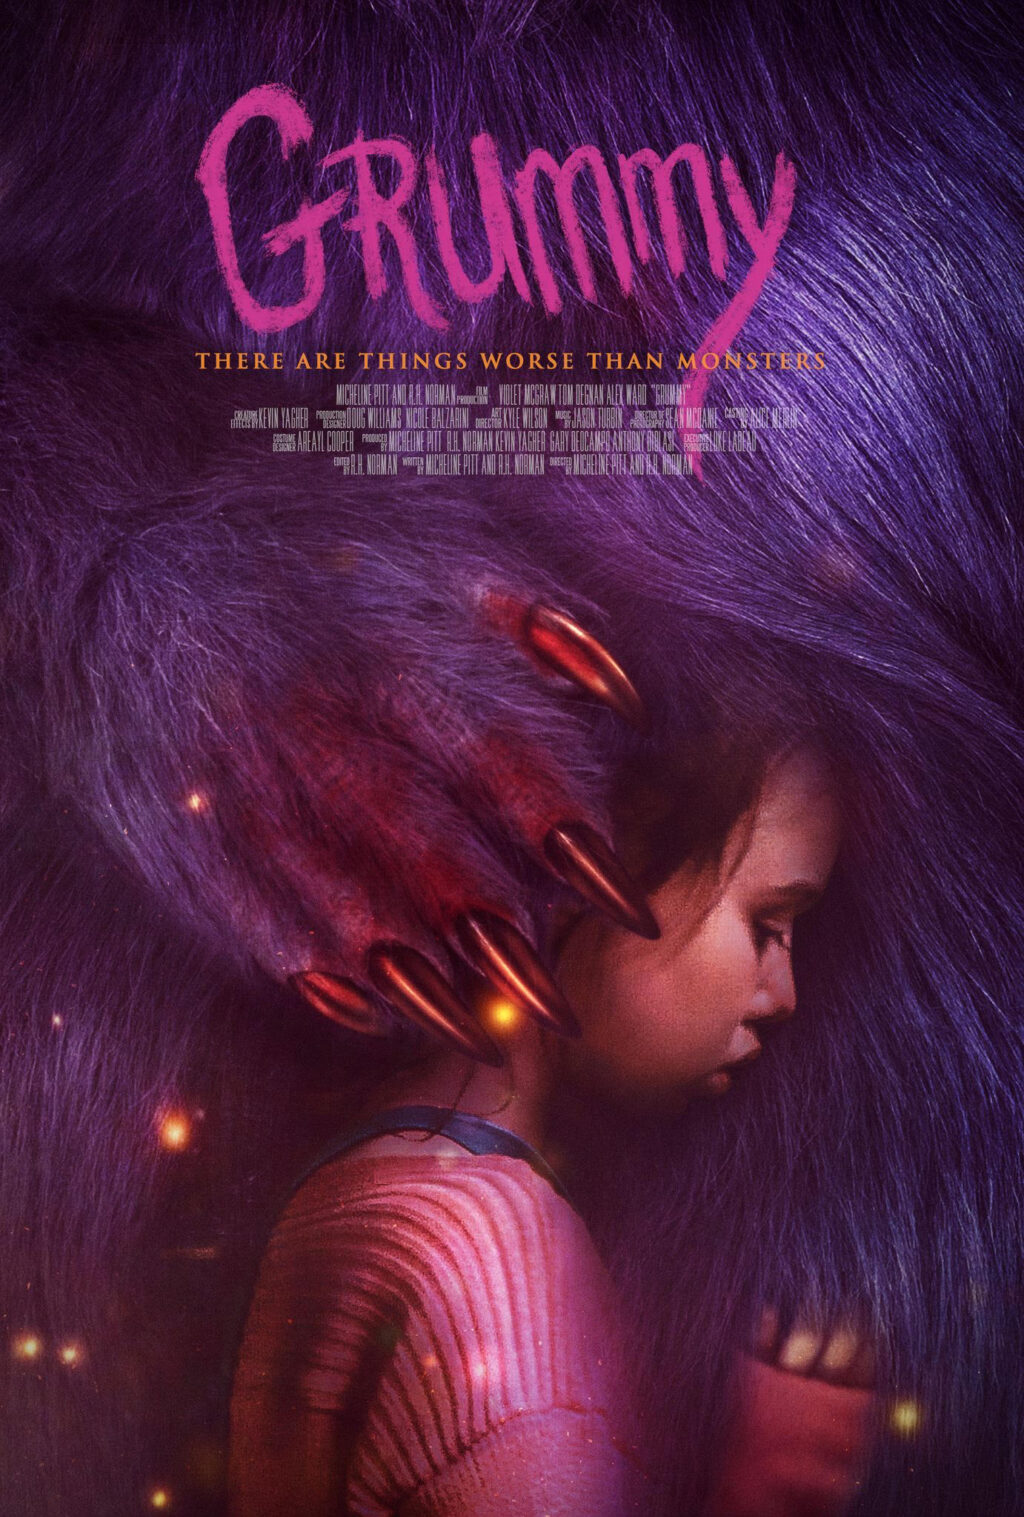 Grummy poster 1024x1517 - 'Grummy': Micheline Pitt Channels Her Sexual Abuse Survival Story Into Oscar Contender